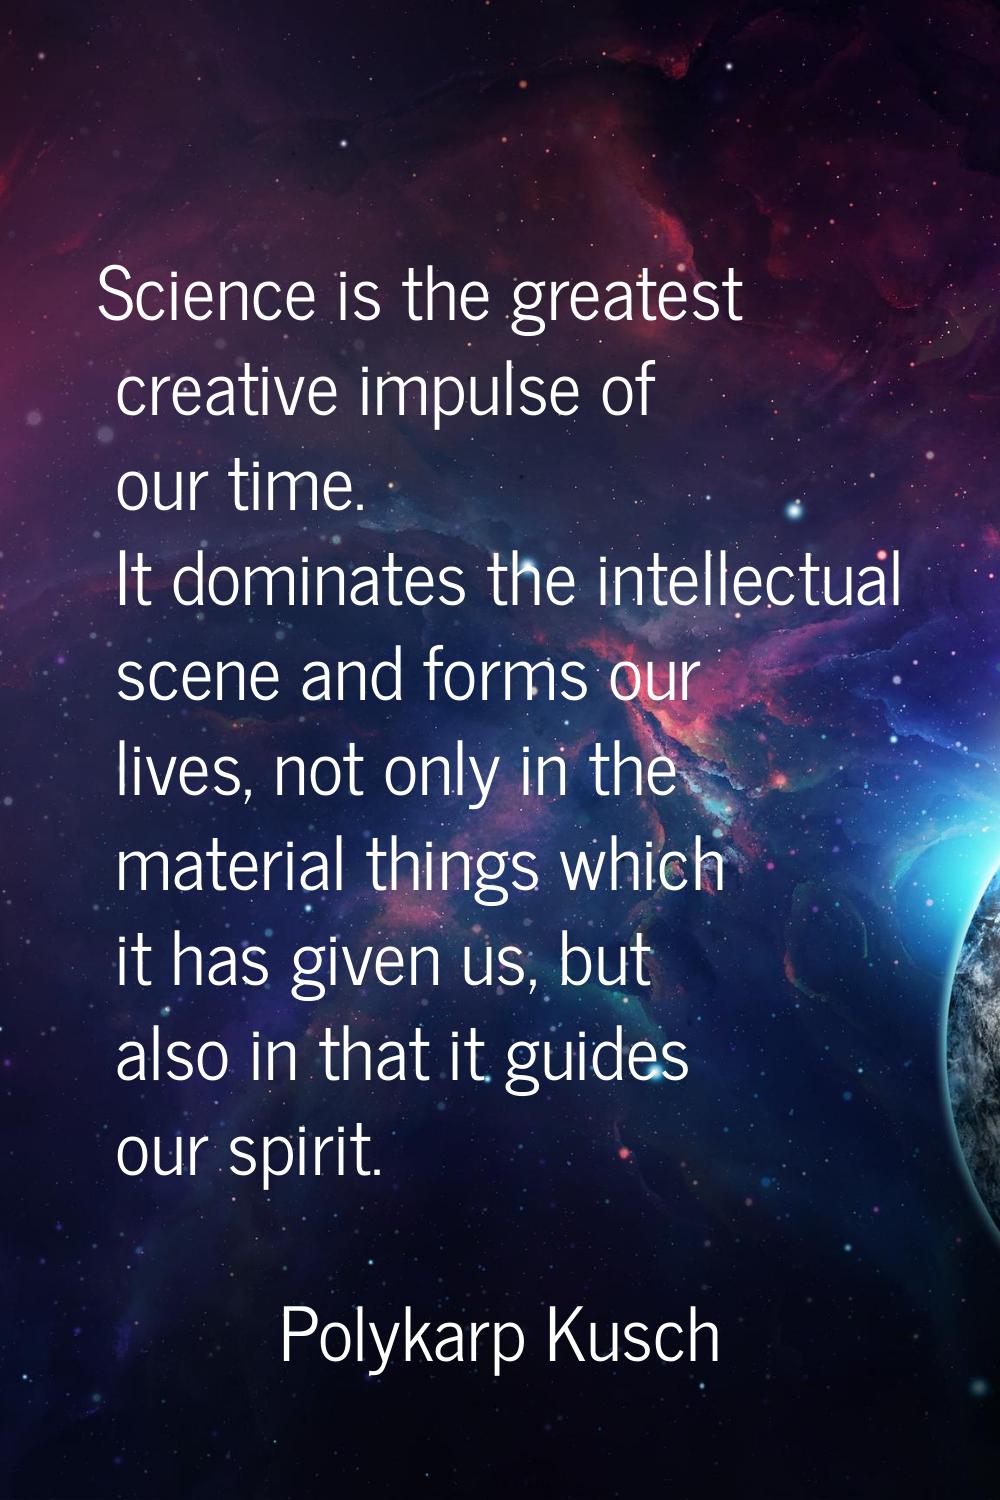 Science is the greatest creative impulse of our time. It dominates the intellectual scene and forms